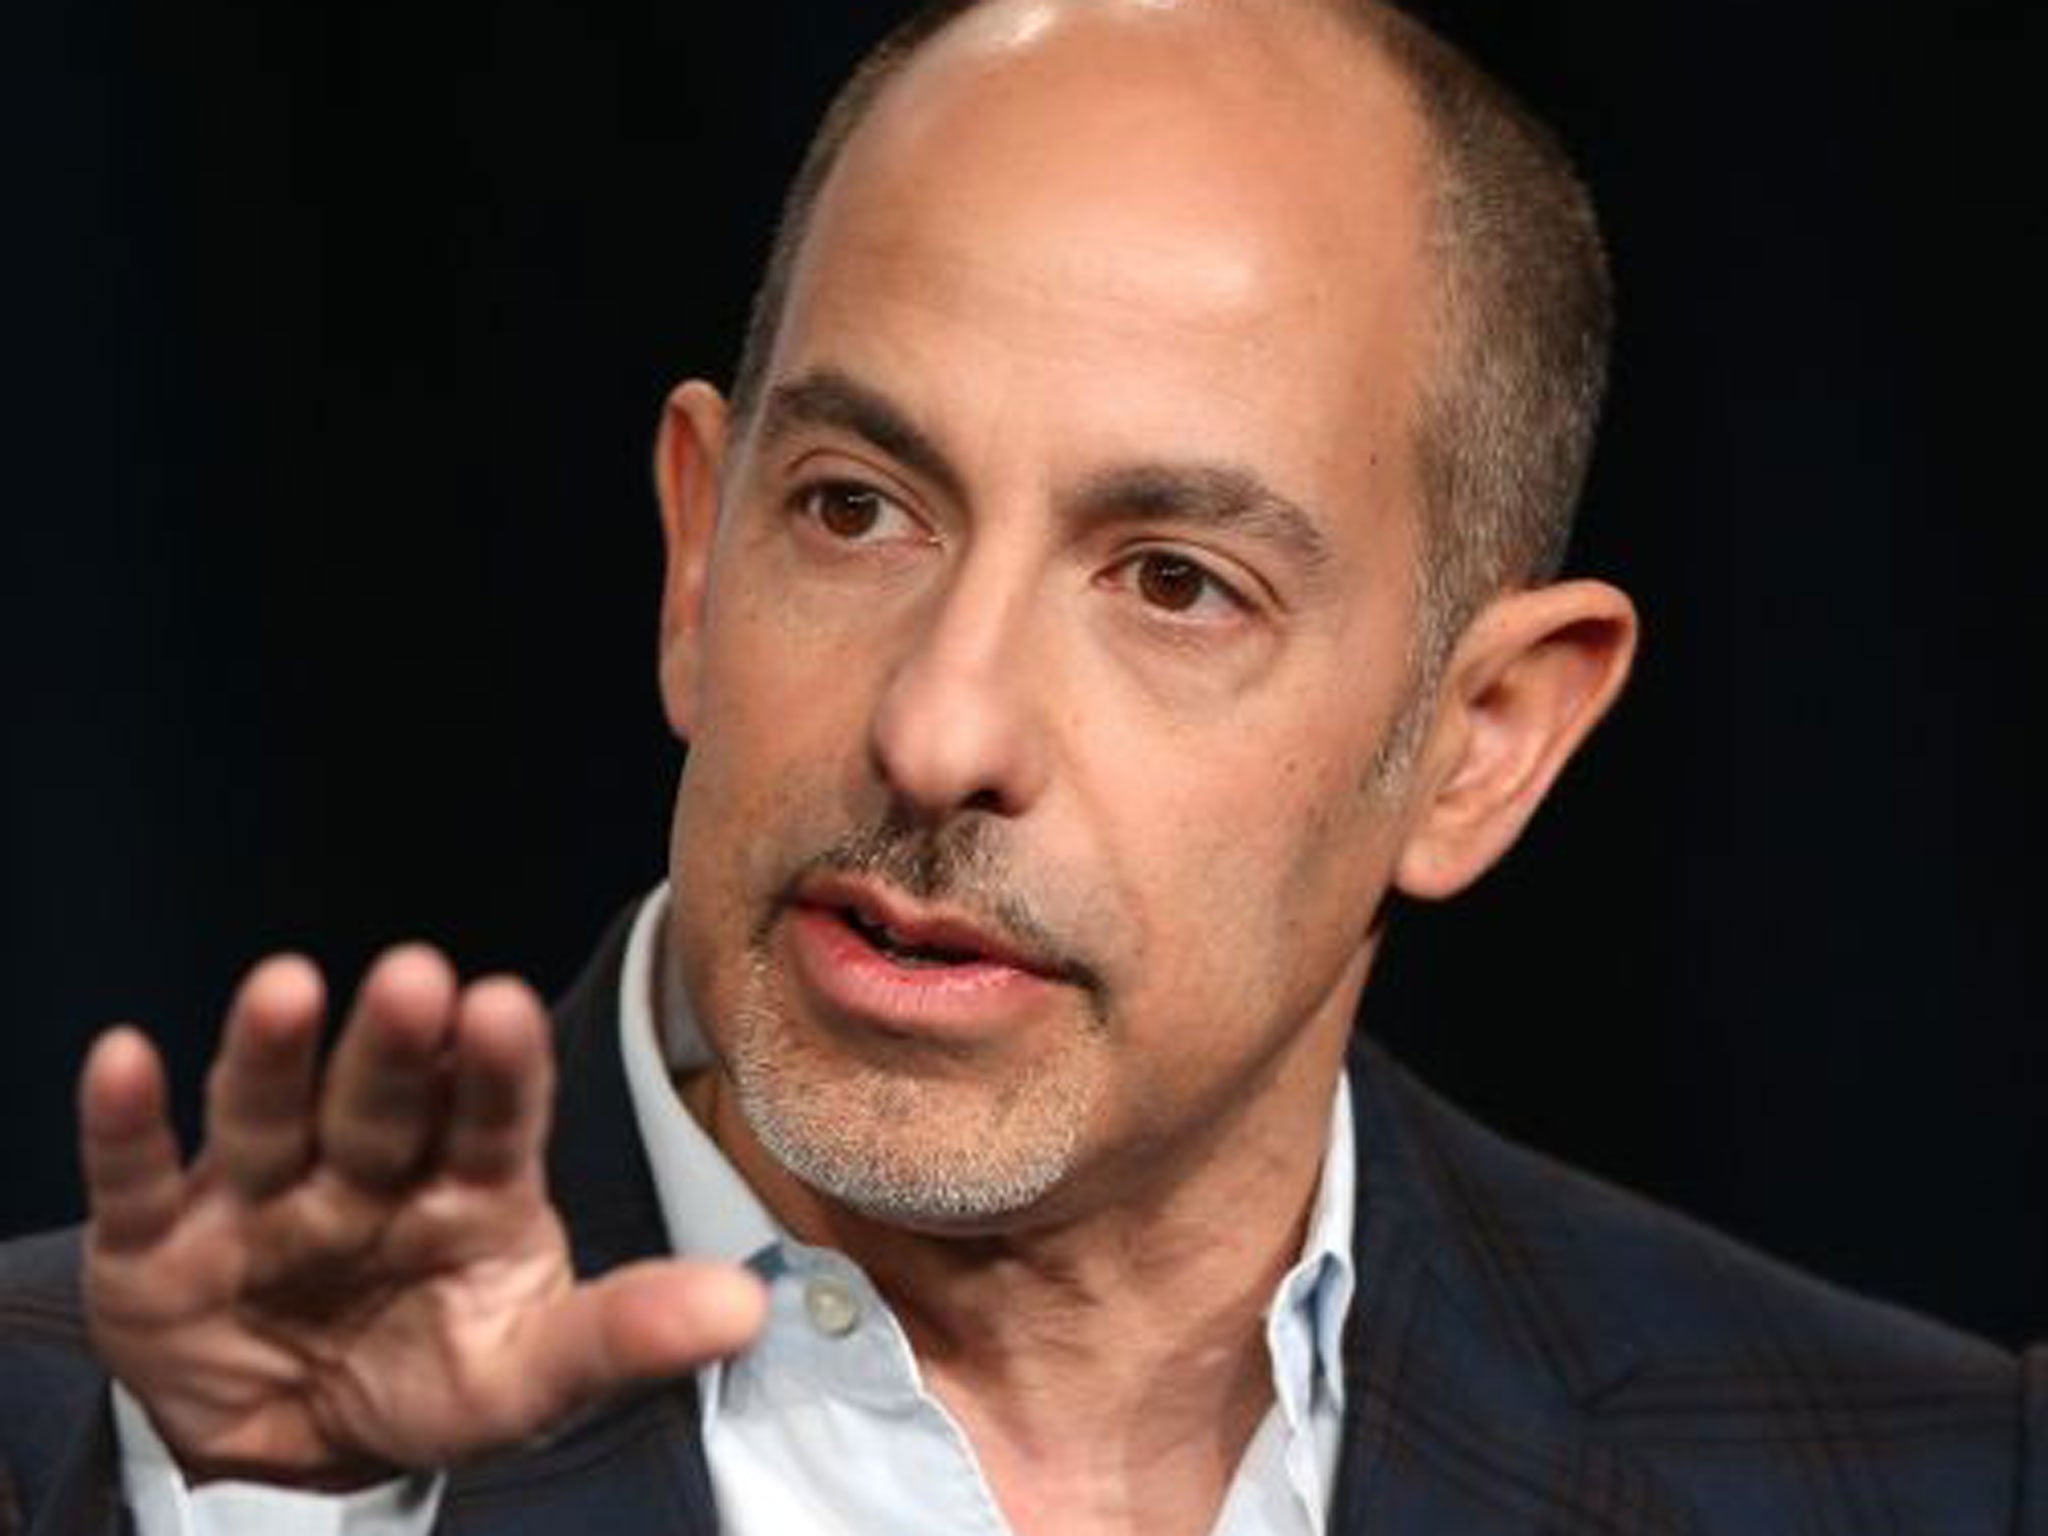 David Goyer has signed to direct an adaptation of Alexandre Dumas' The Count of Monte Cristo